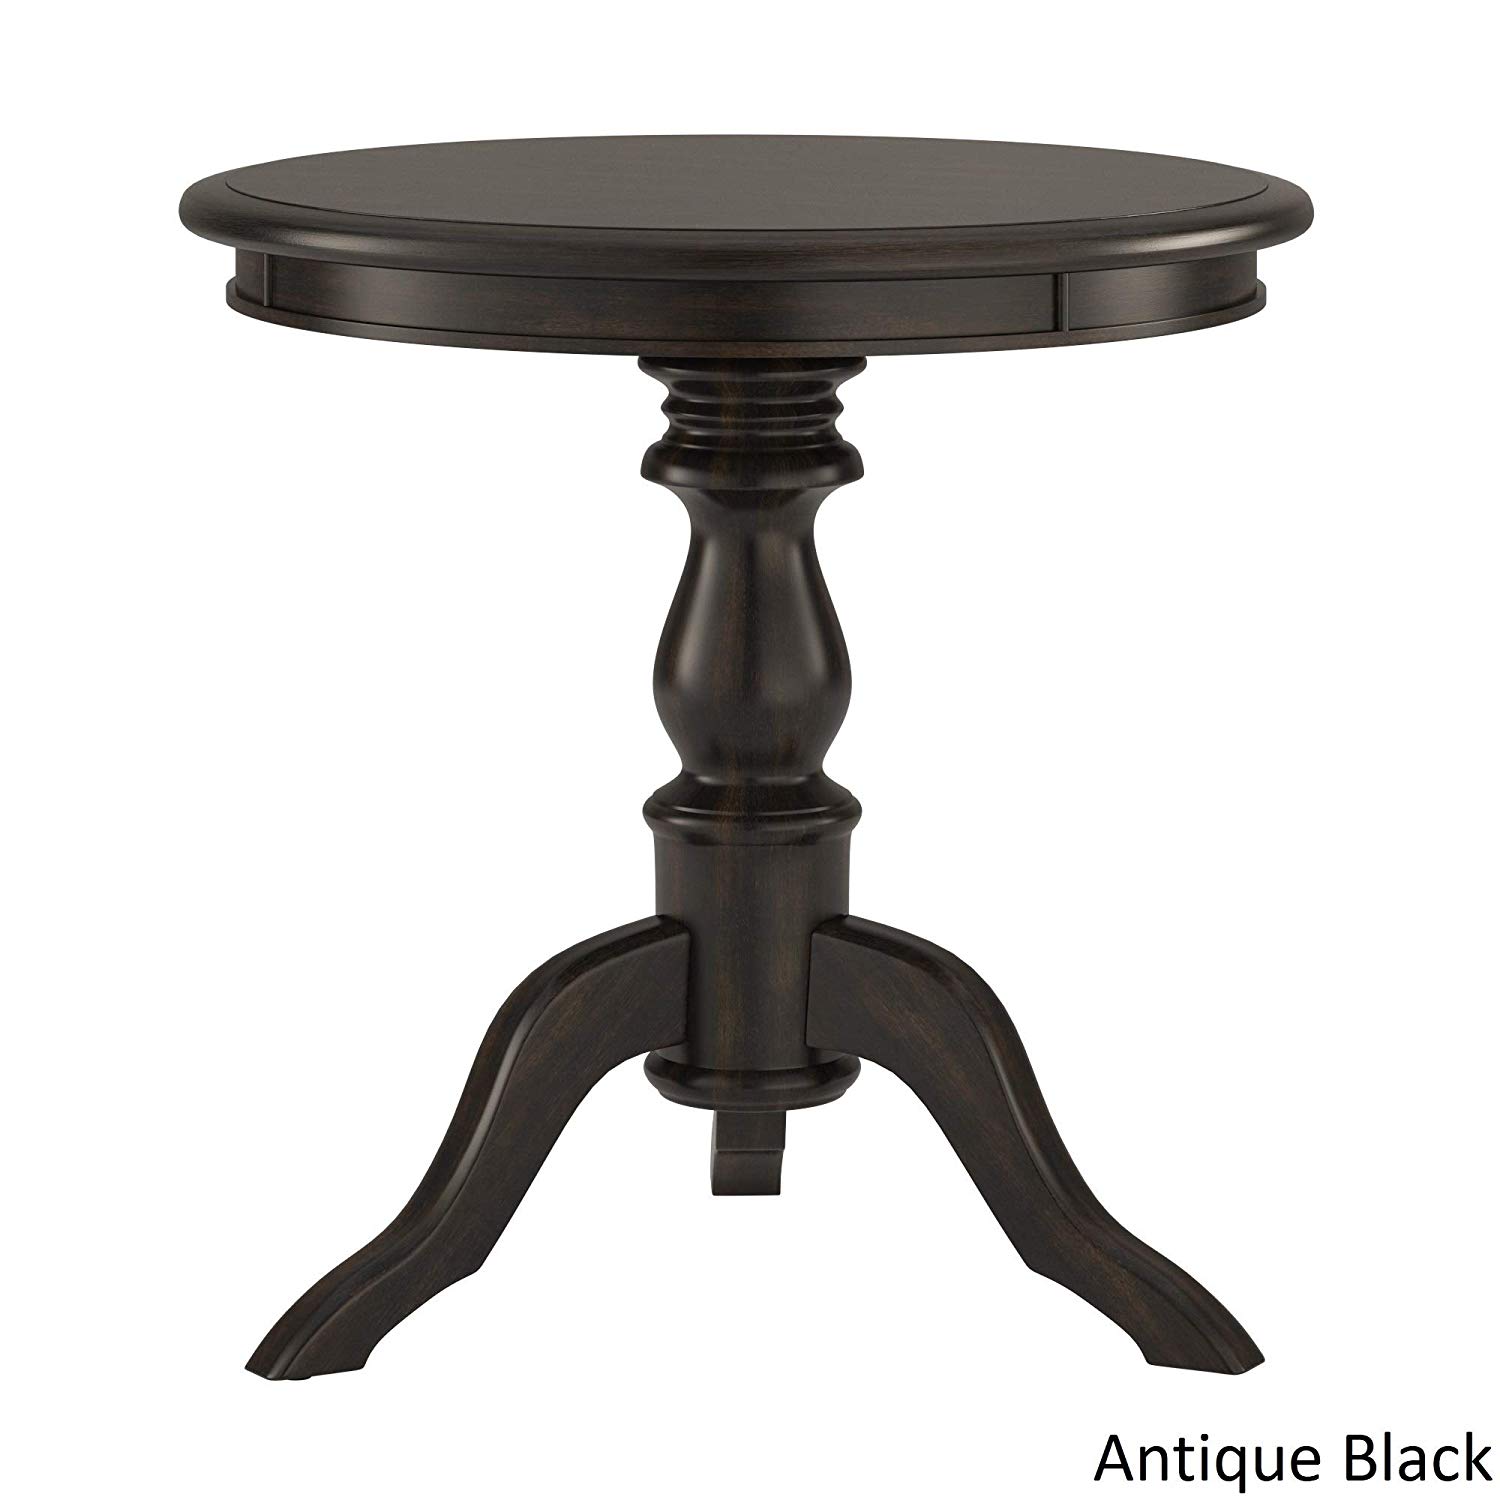 beckett antique wood pedestal accent table inspire style classic black kitchen dining outdoor farmhouse small round wooden corner bench ikea champagne bucket target side dragonfly